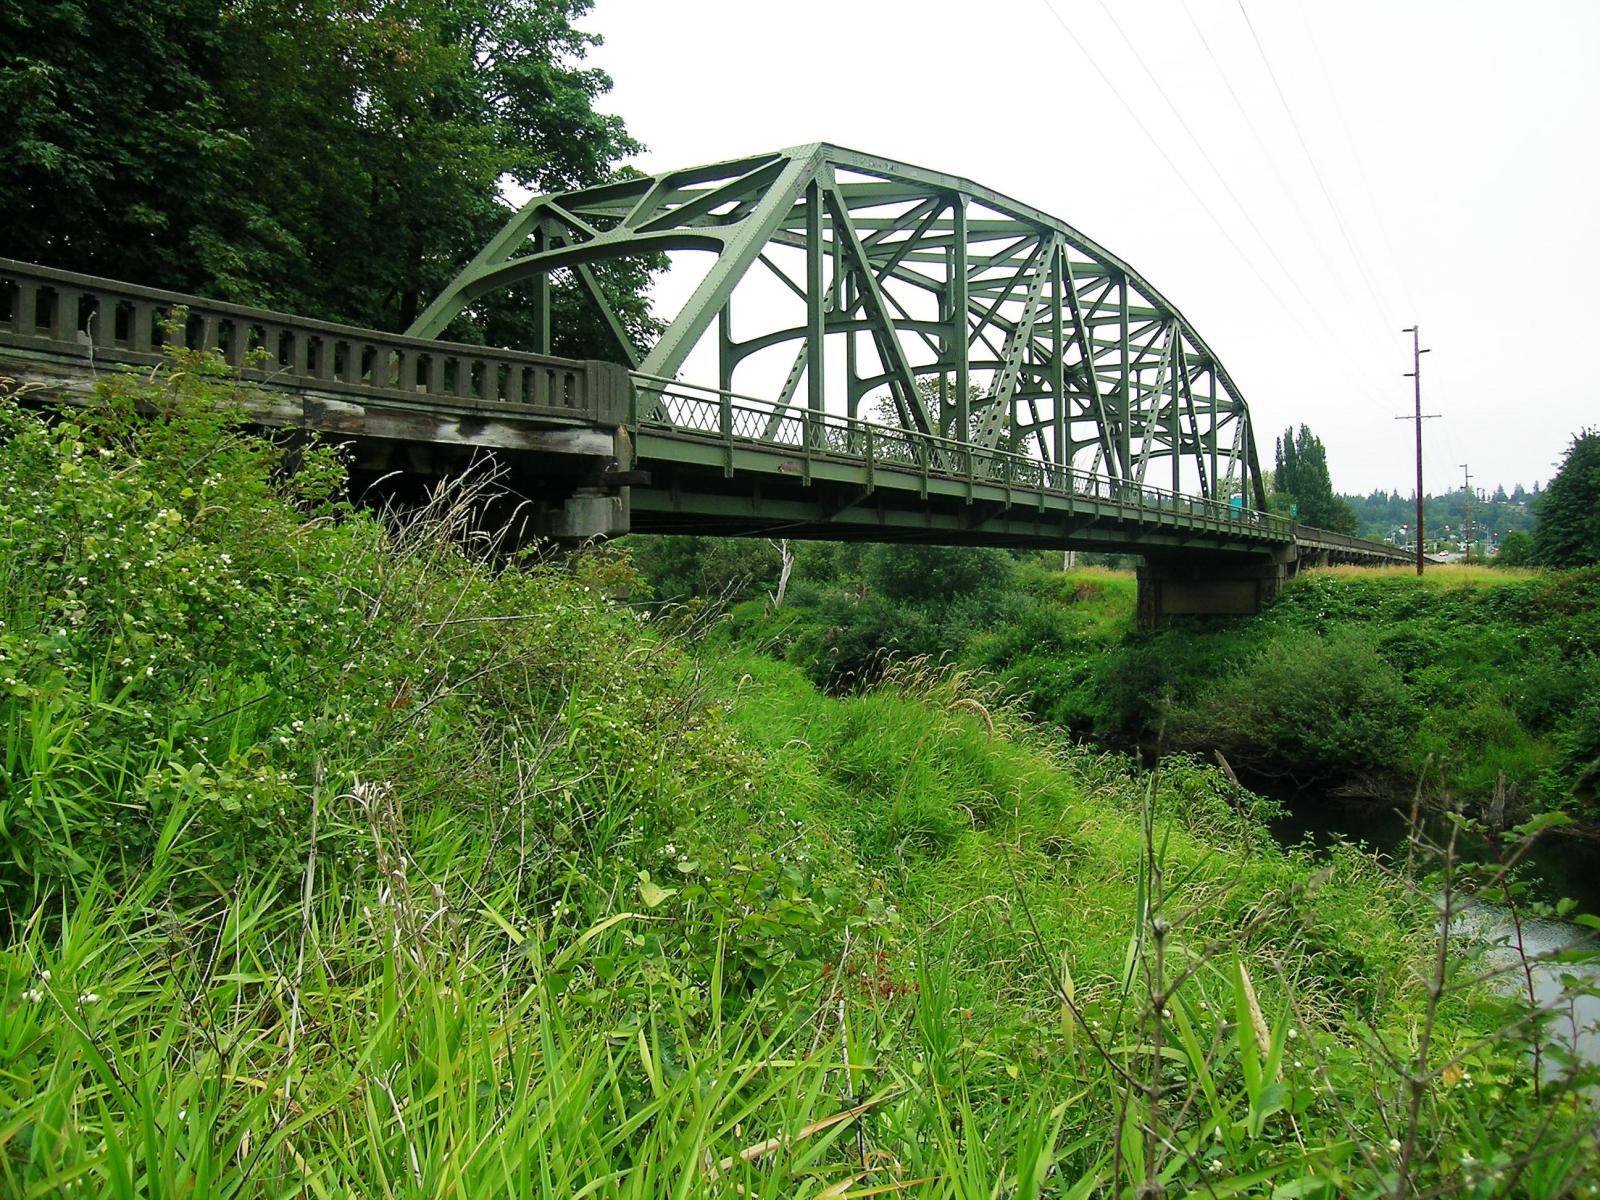 A photograph of a steel trestle bridge over a river with grassy banks.